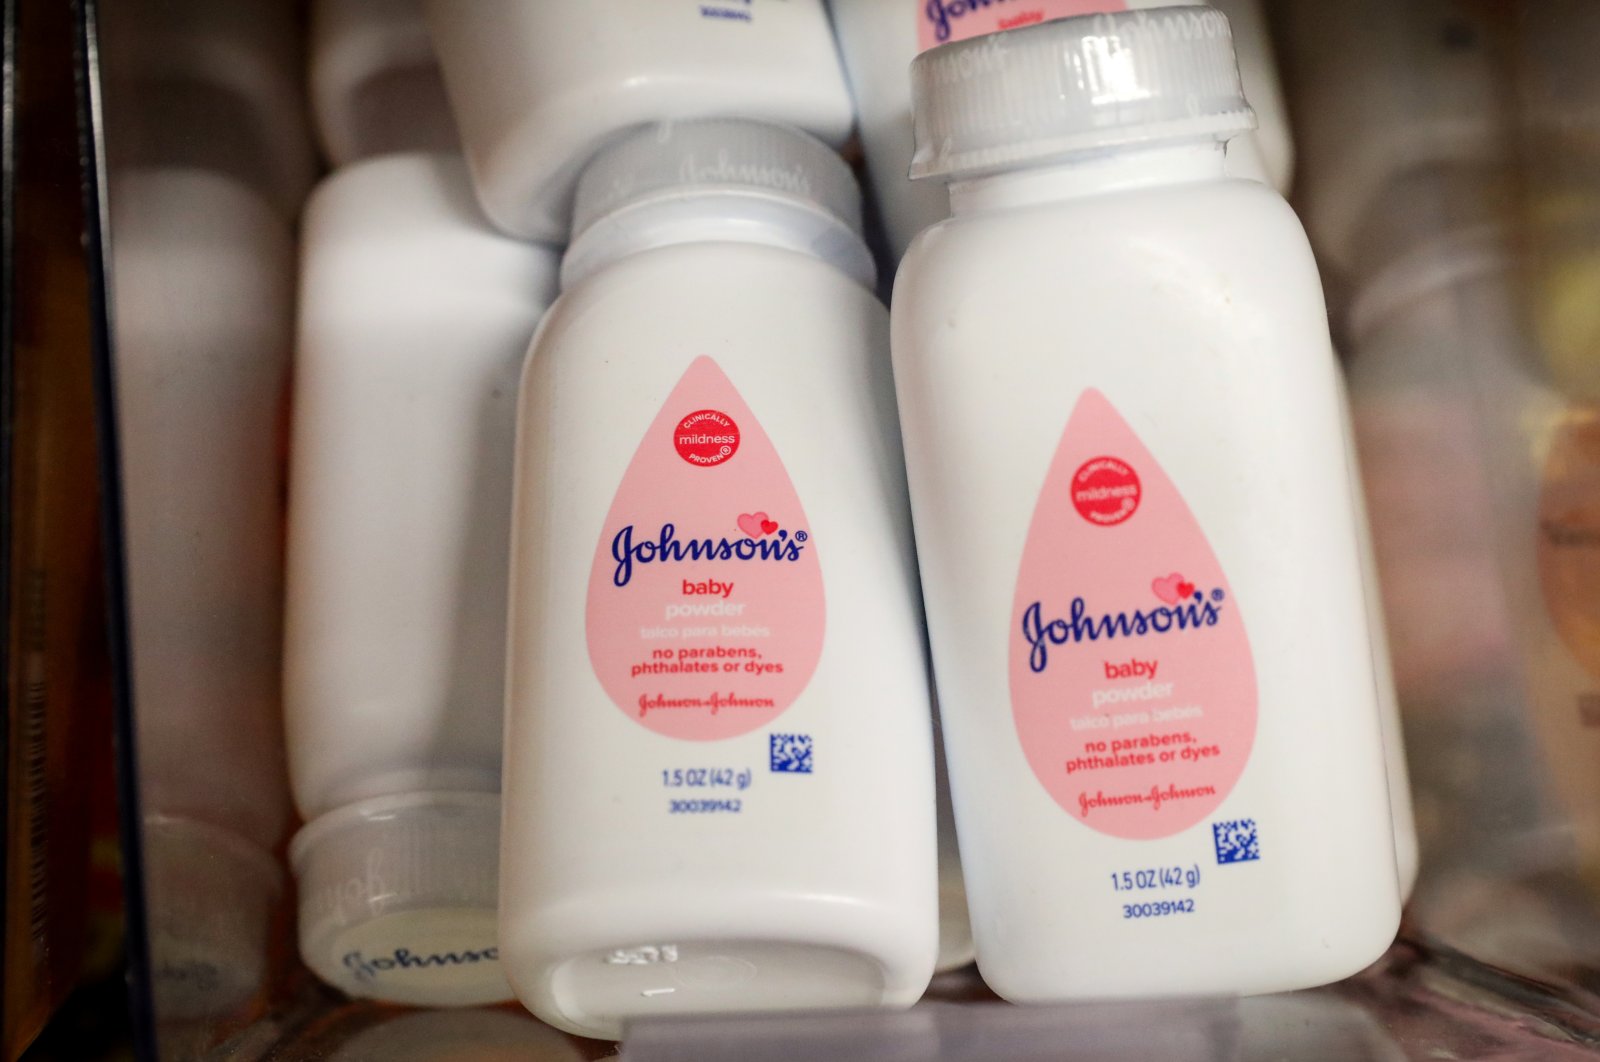 Bottles of Johnson's baby powder are displayed in a store in New York City, New York, U.S., Jan. 22, 2019. (Reuters Photo)